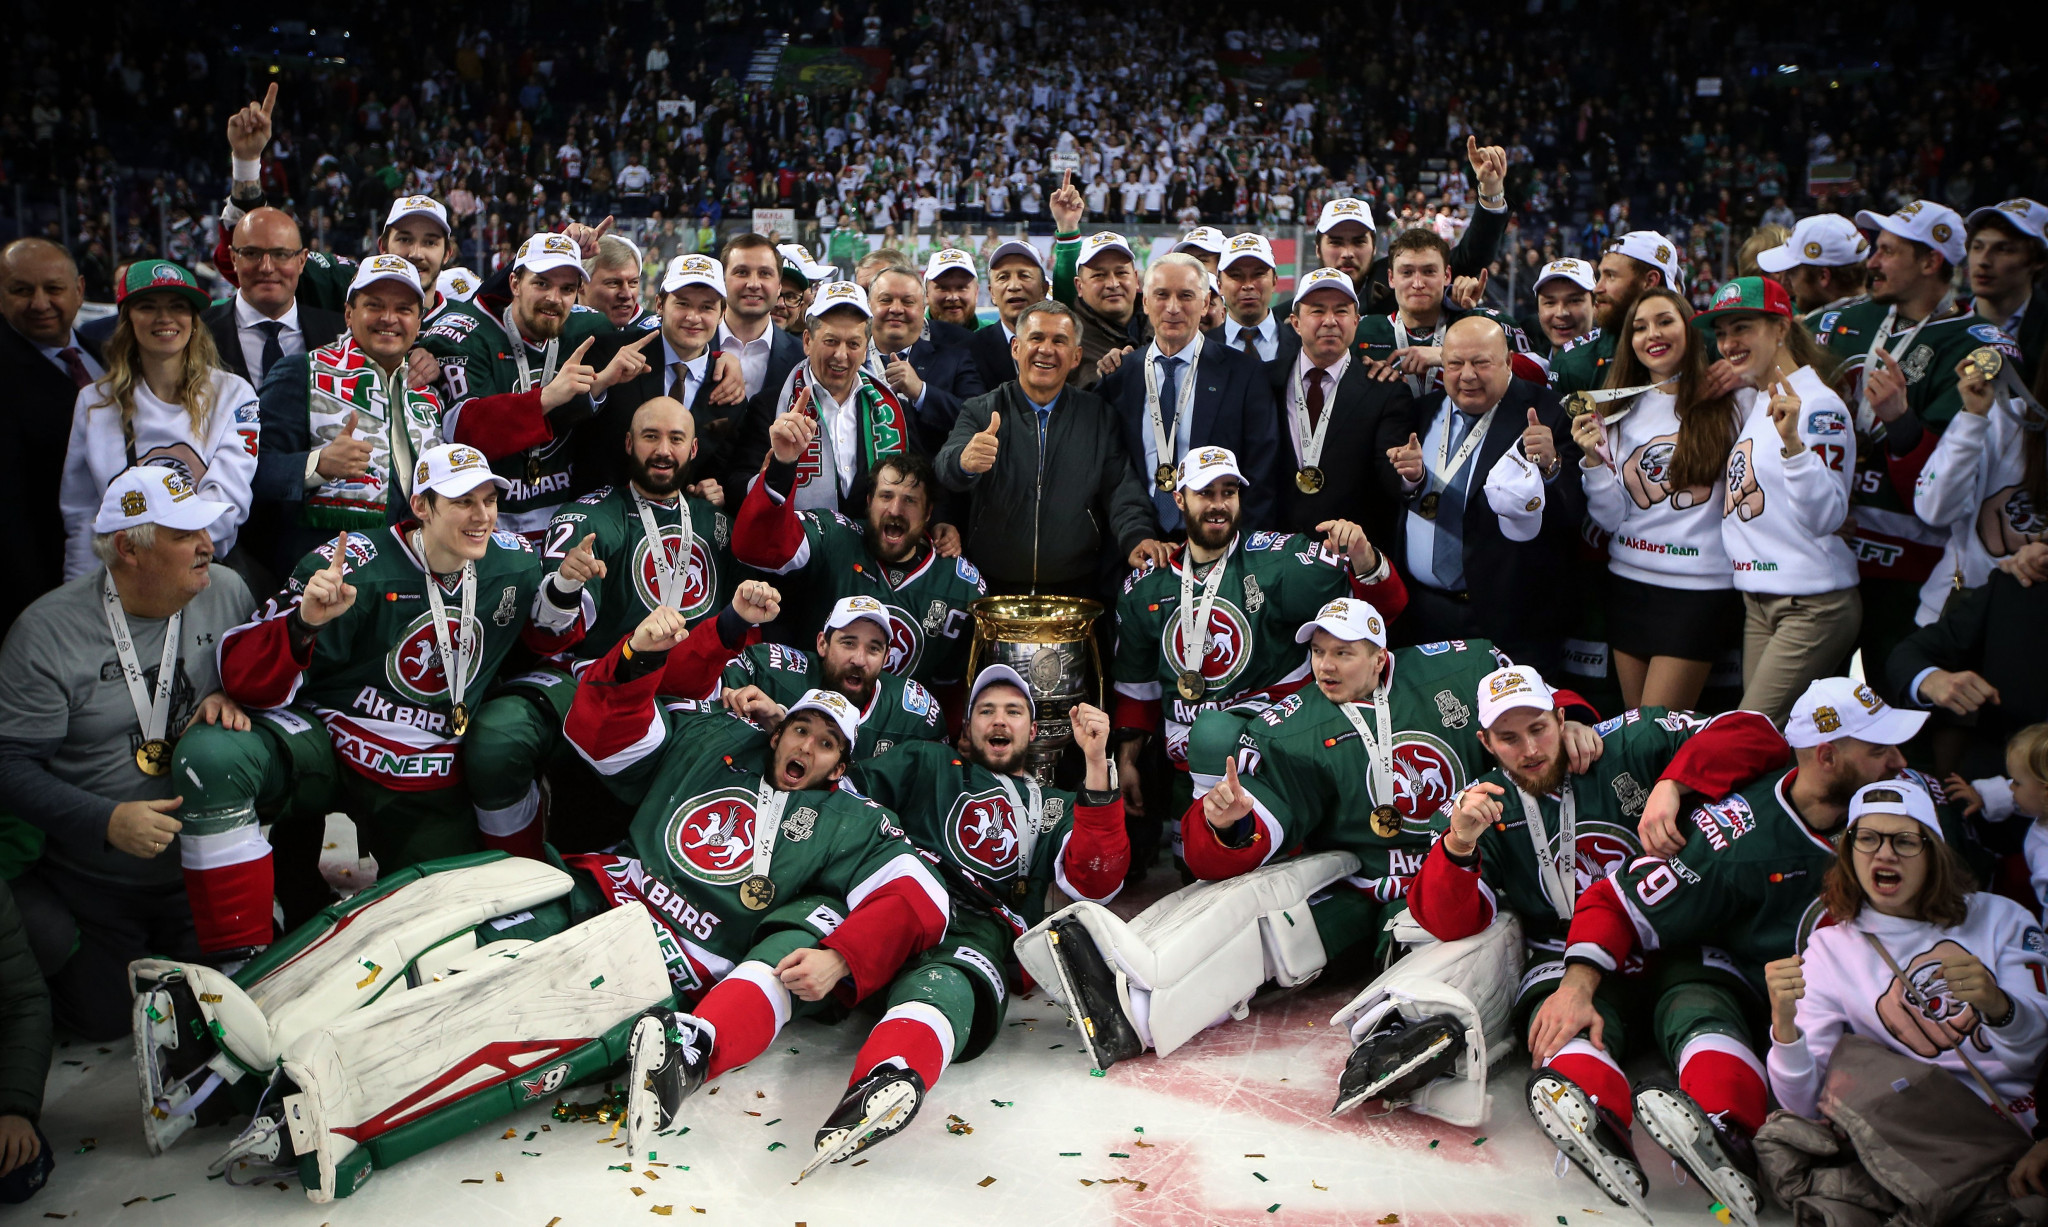 Nail Maganov is the President of Kontinental Hockey League club Ak Bars ©Getty Images